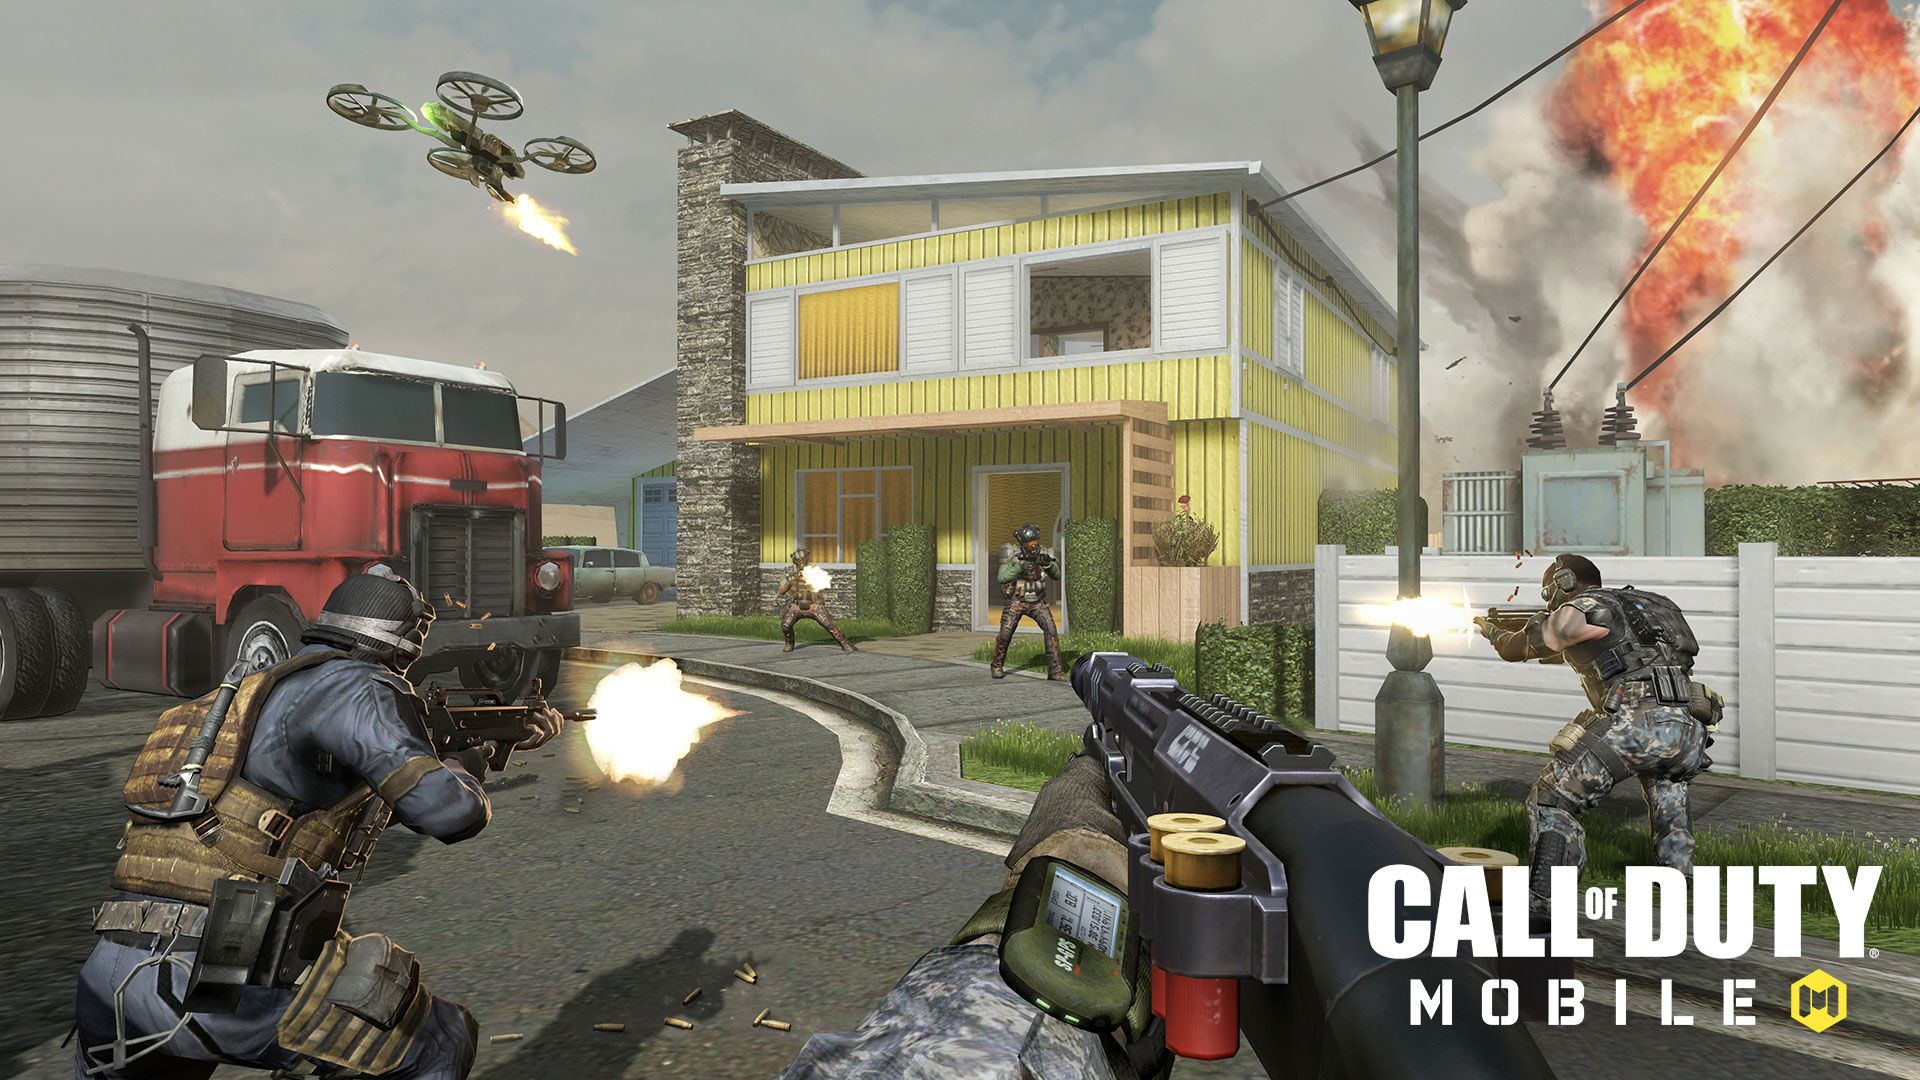 Call of duty 3 mobile. Cod mobile. Call of Duty mobile. Call of Duty mobile Battle Royale. Call of Duty mobile Gameplay.